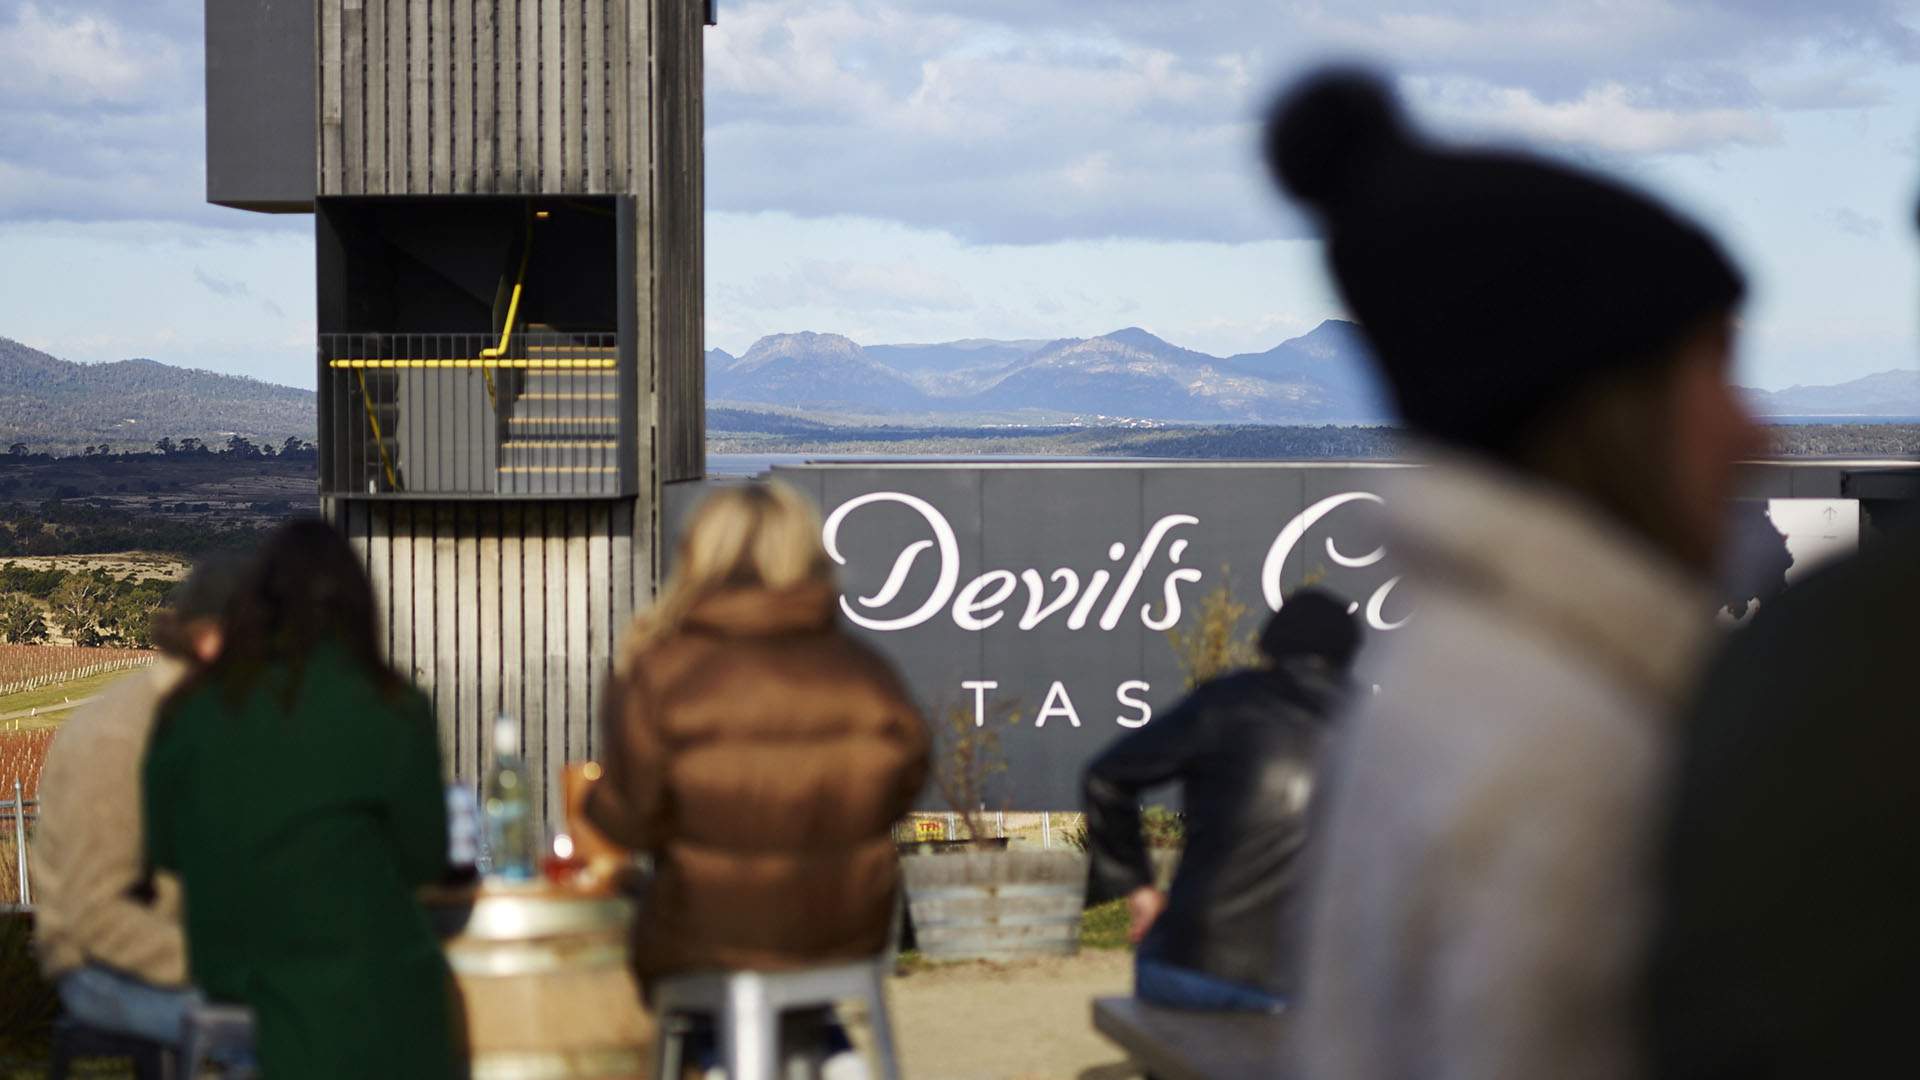 Tasmania's Devil's Corner Has Opened a Pop-Up Cellar Door While Its Current Site Gets a Revamp